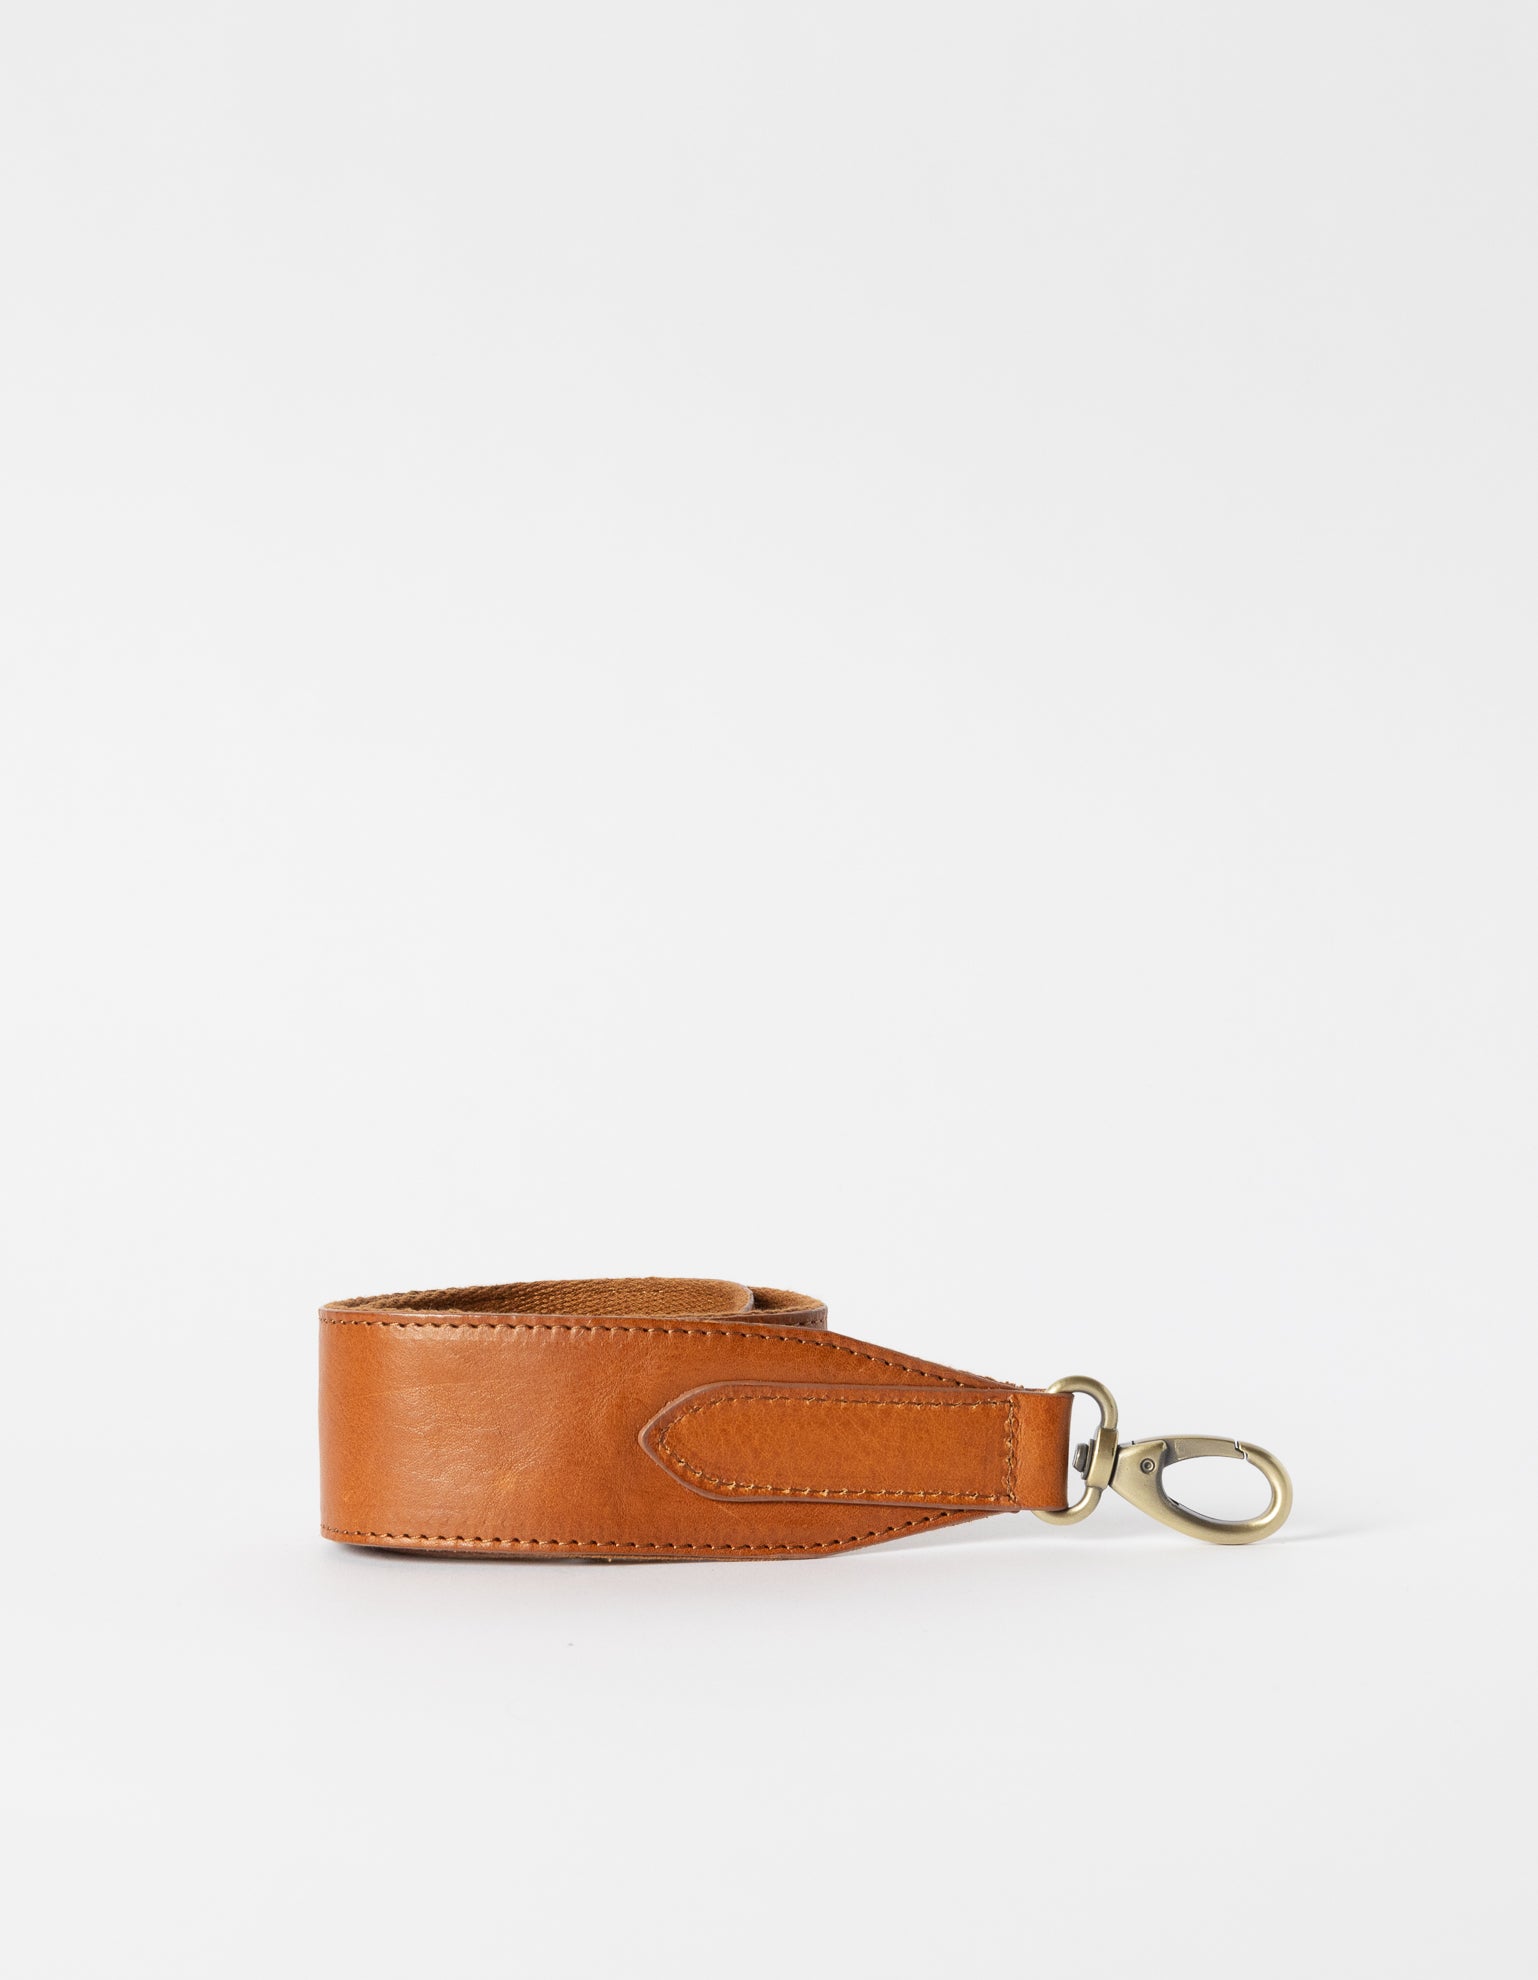 Cognac stromboli leather add-on handbag strap with webbing on one side. product image.